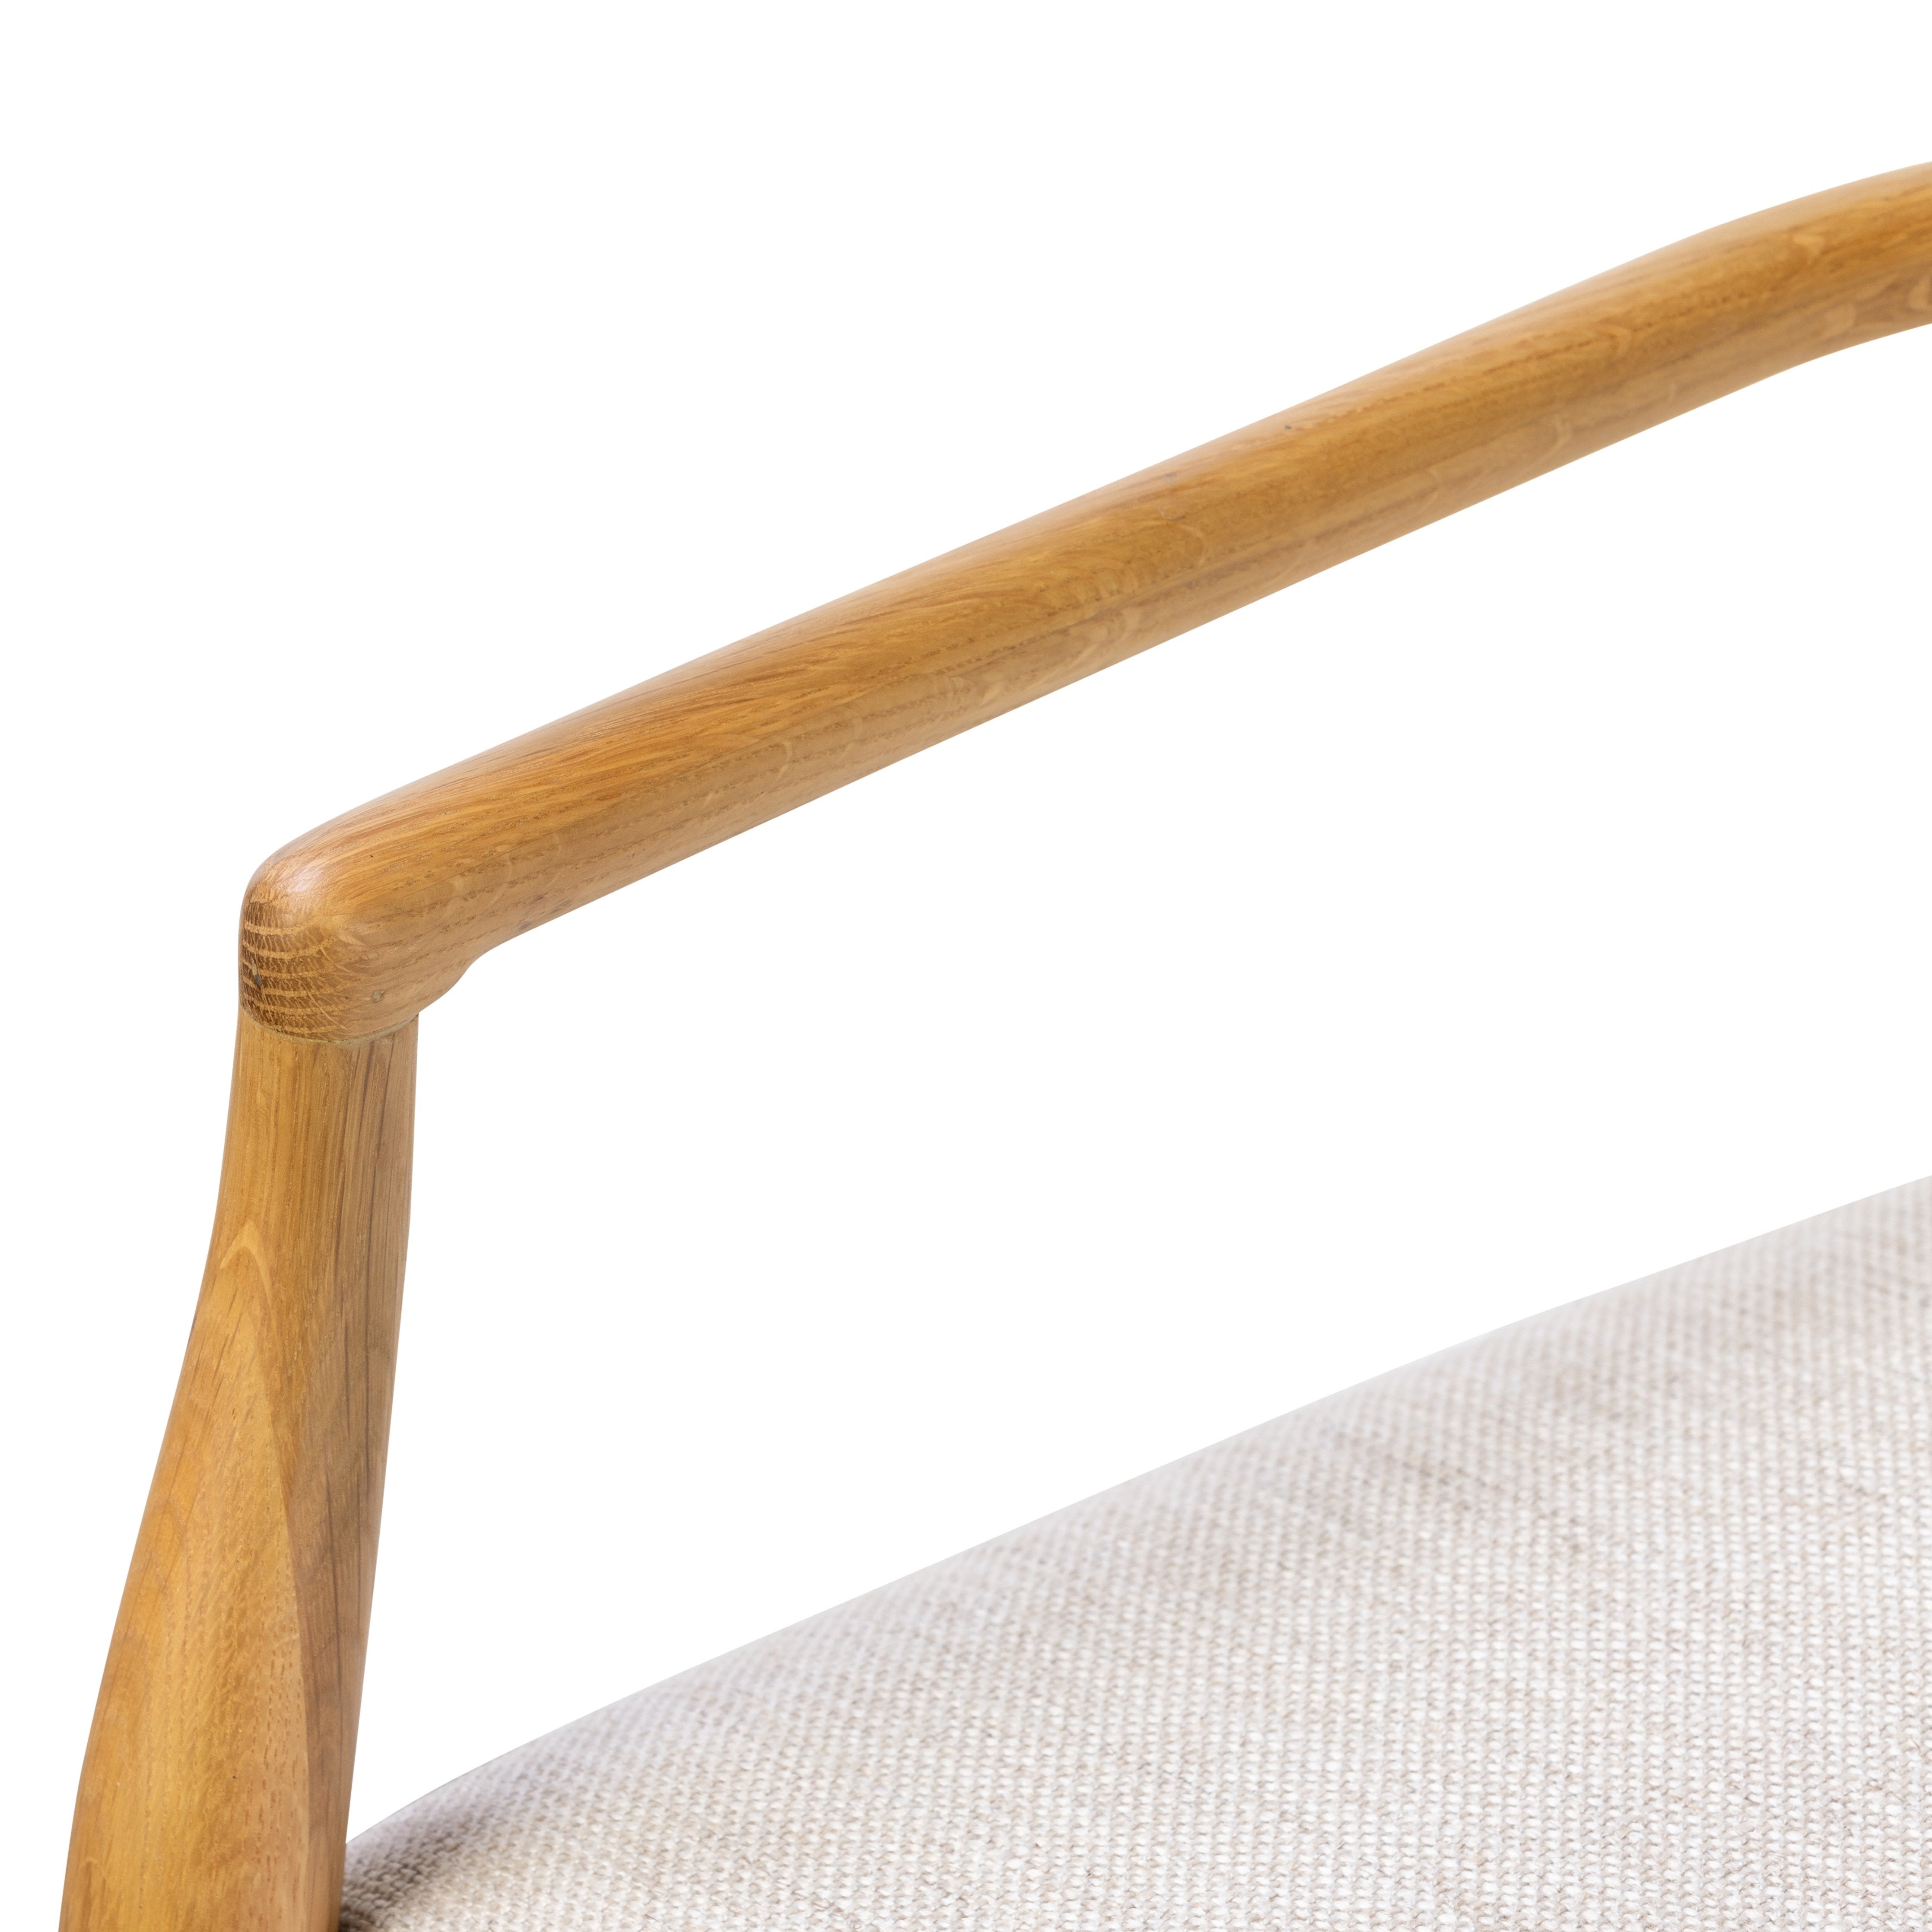 The classic ladderback chair, reimagined. Light-finished solid oak frames a squared cotton- and linen-blend seat, for a textural feel and comfortable sit.Collection: Bolton Amethyst Home provides interior design, new home construction design consulting, vintage area rugs, and lighting in the Monterey metro area.